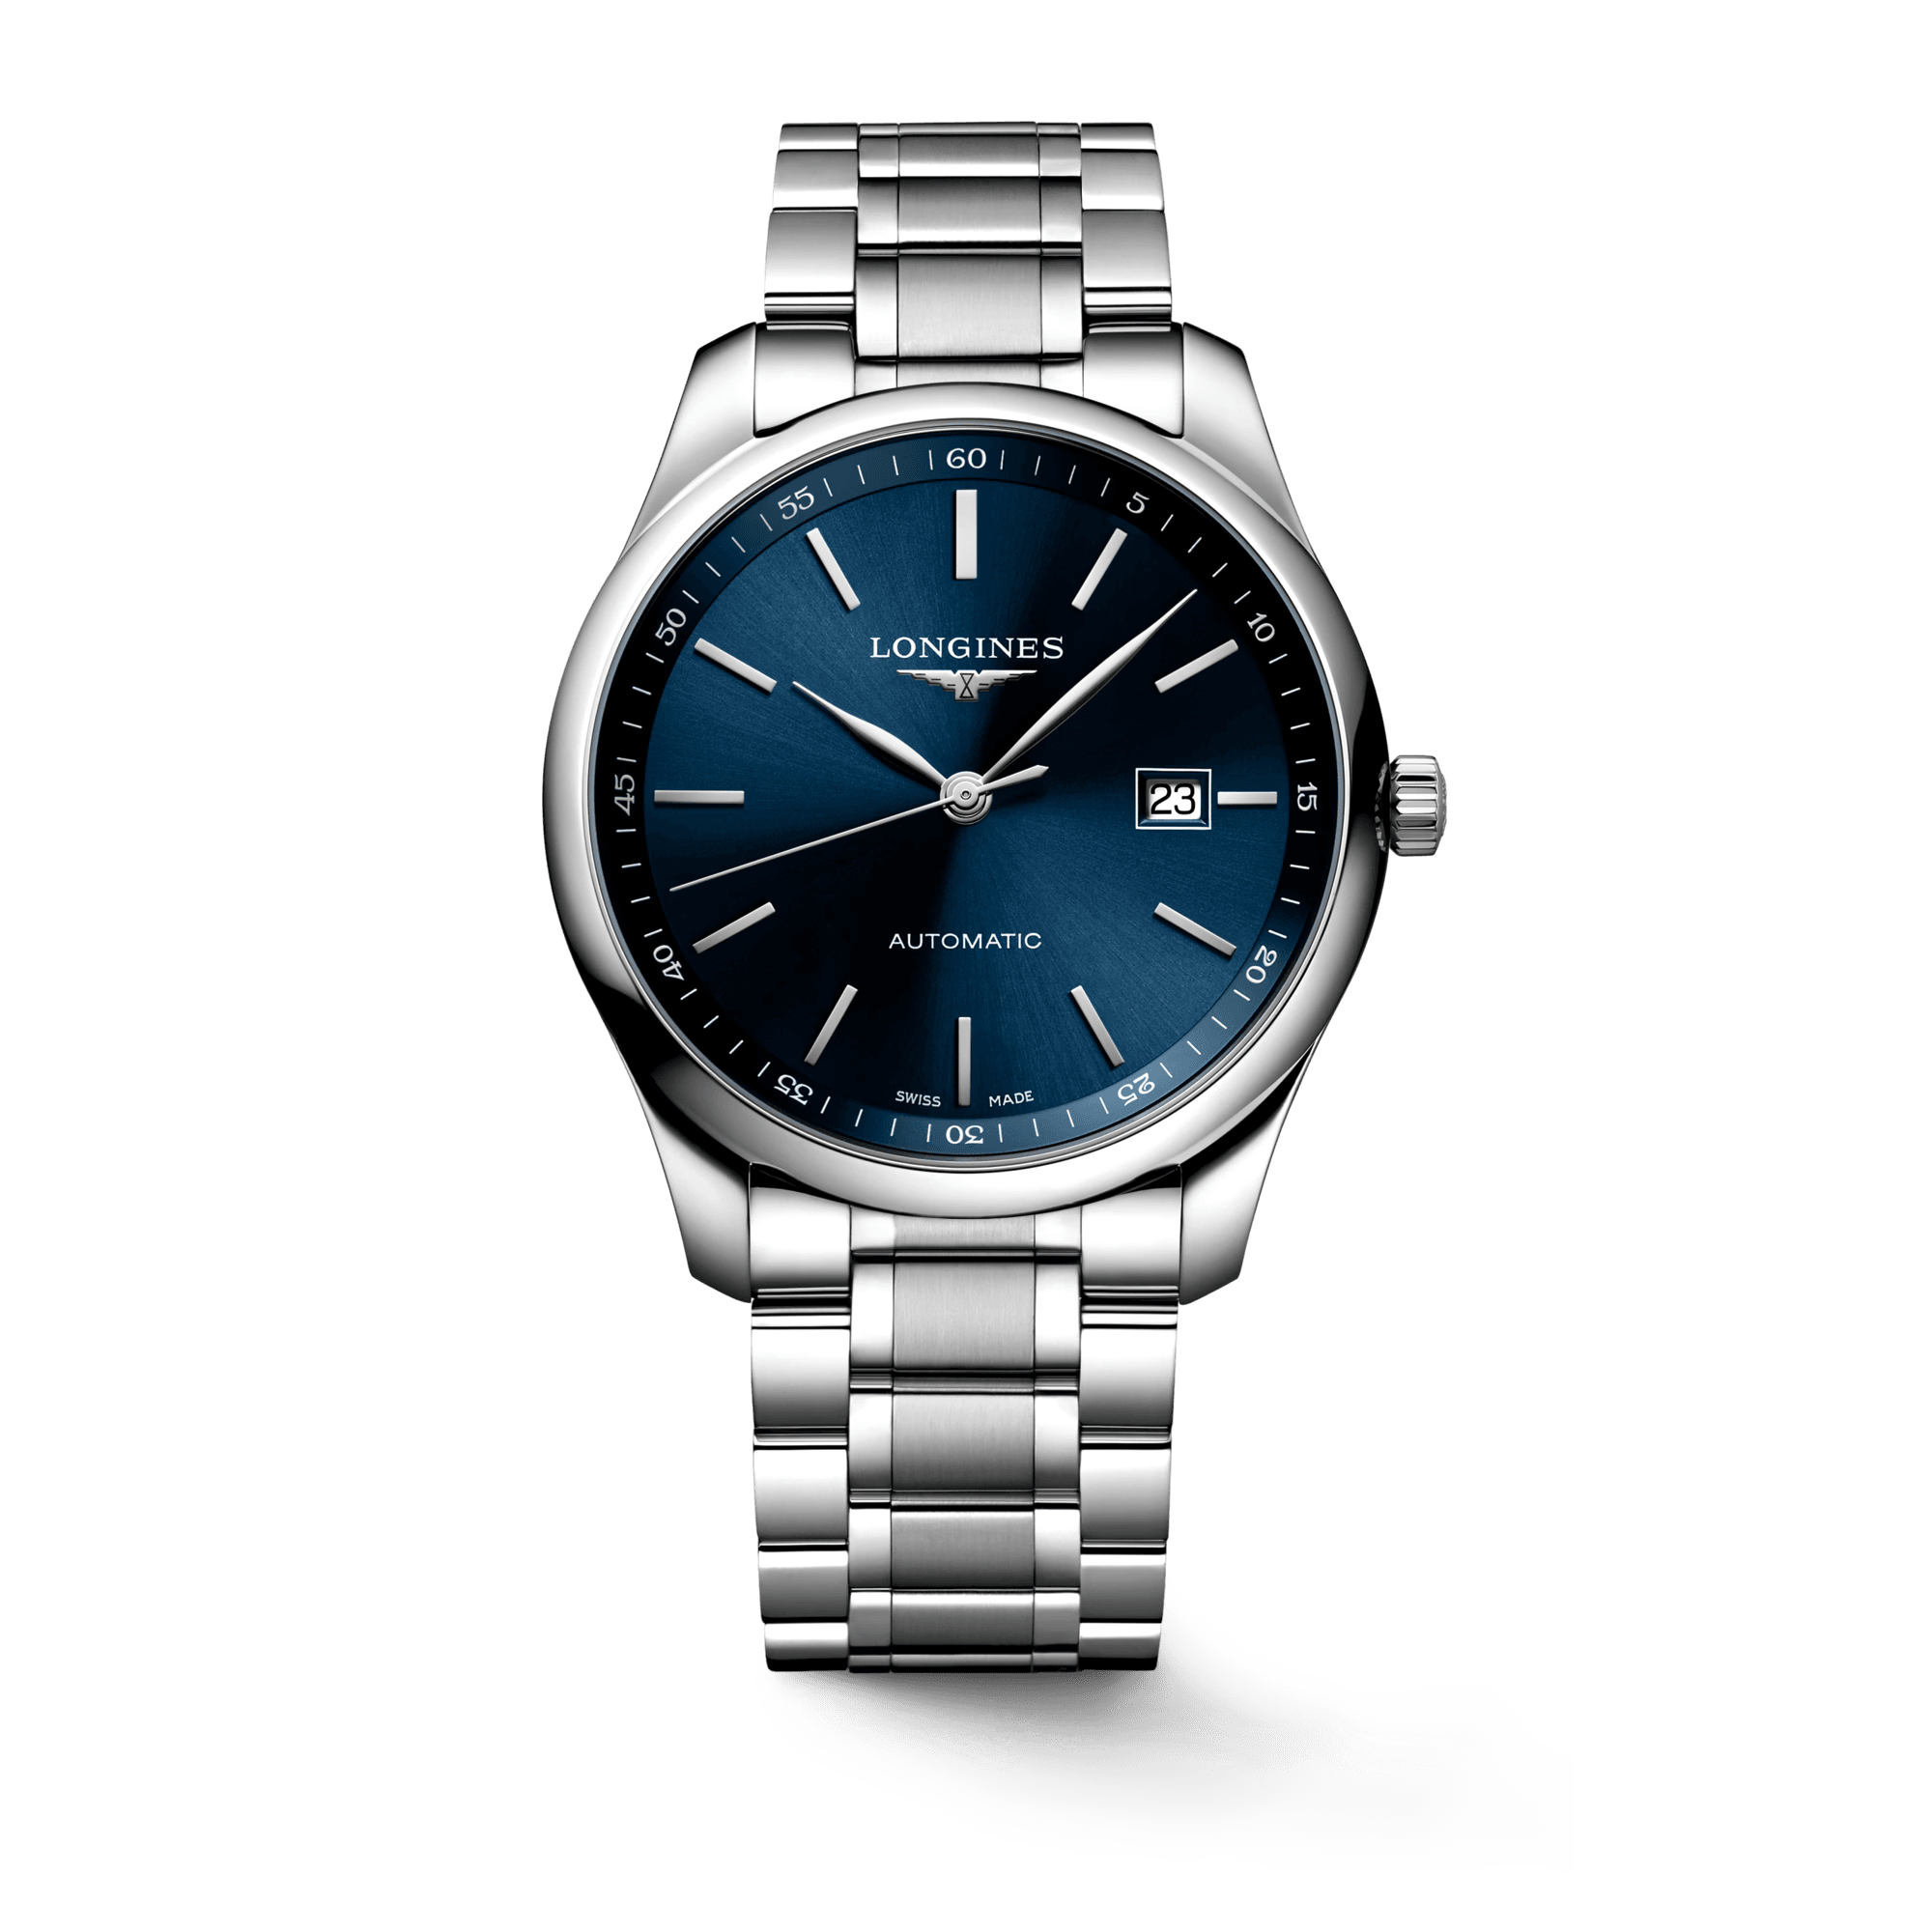 The Longines Master Collection Automatic Men's Watch L28934926